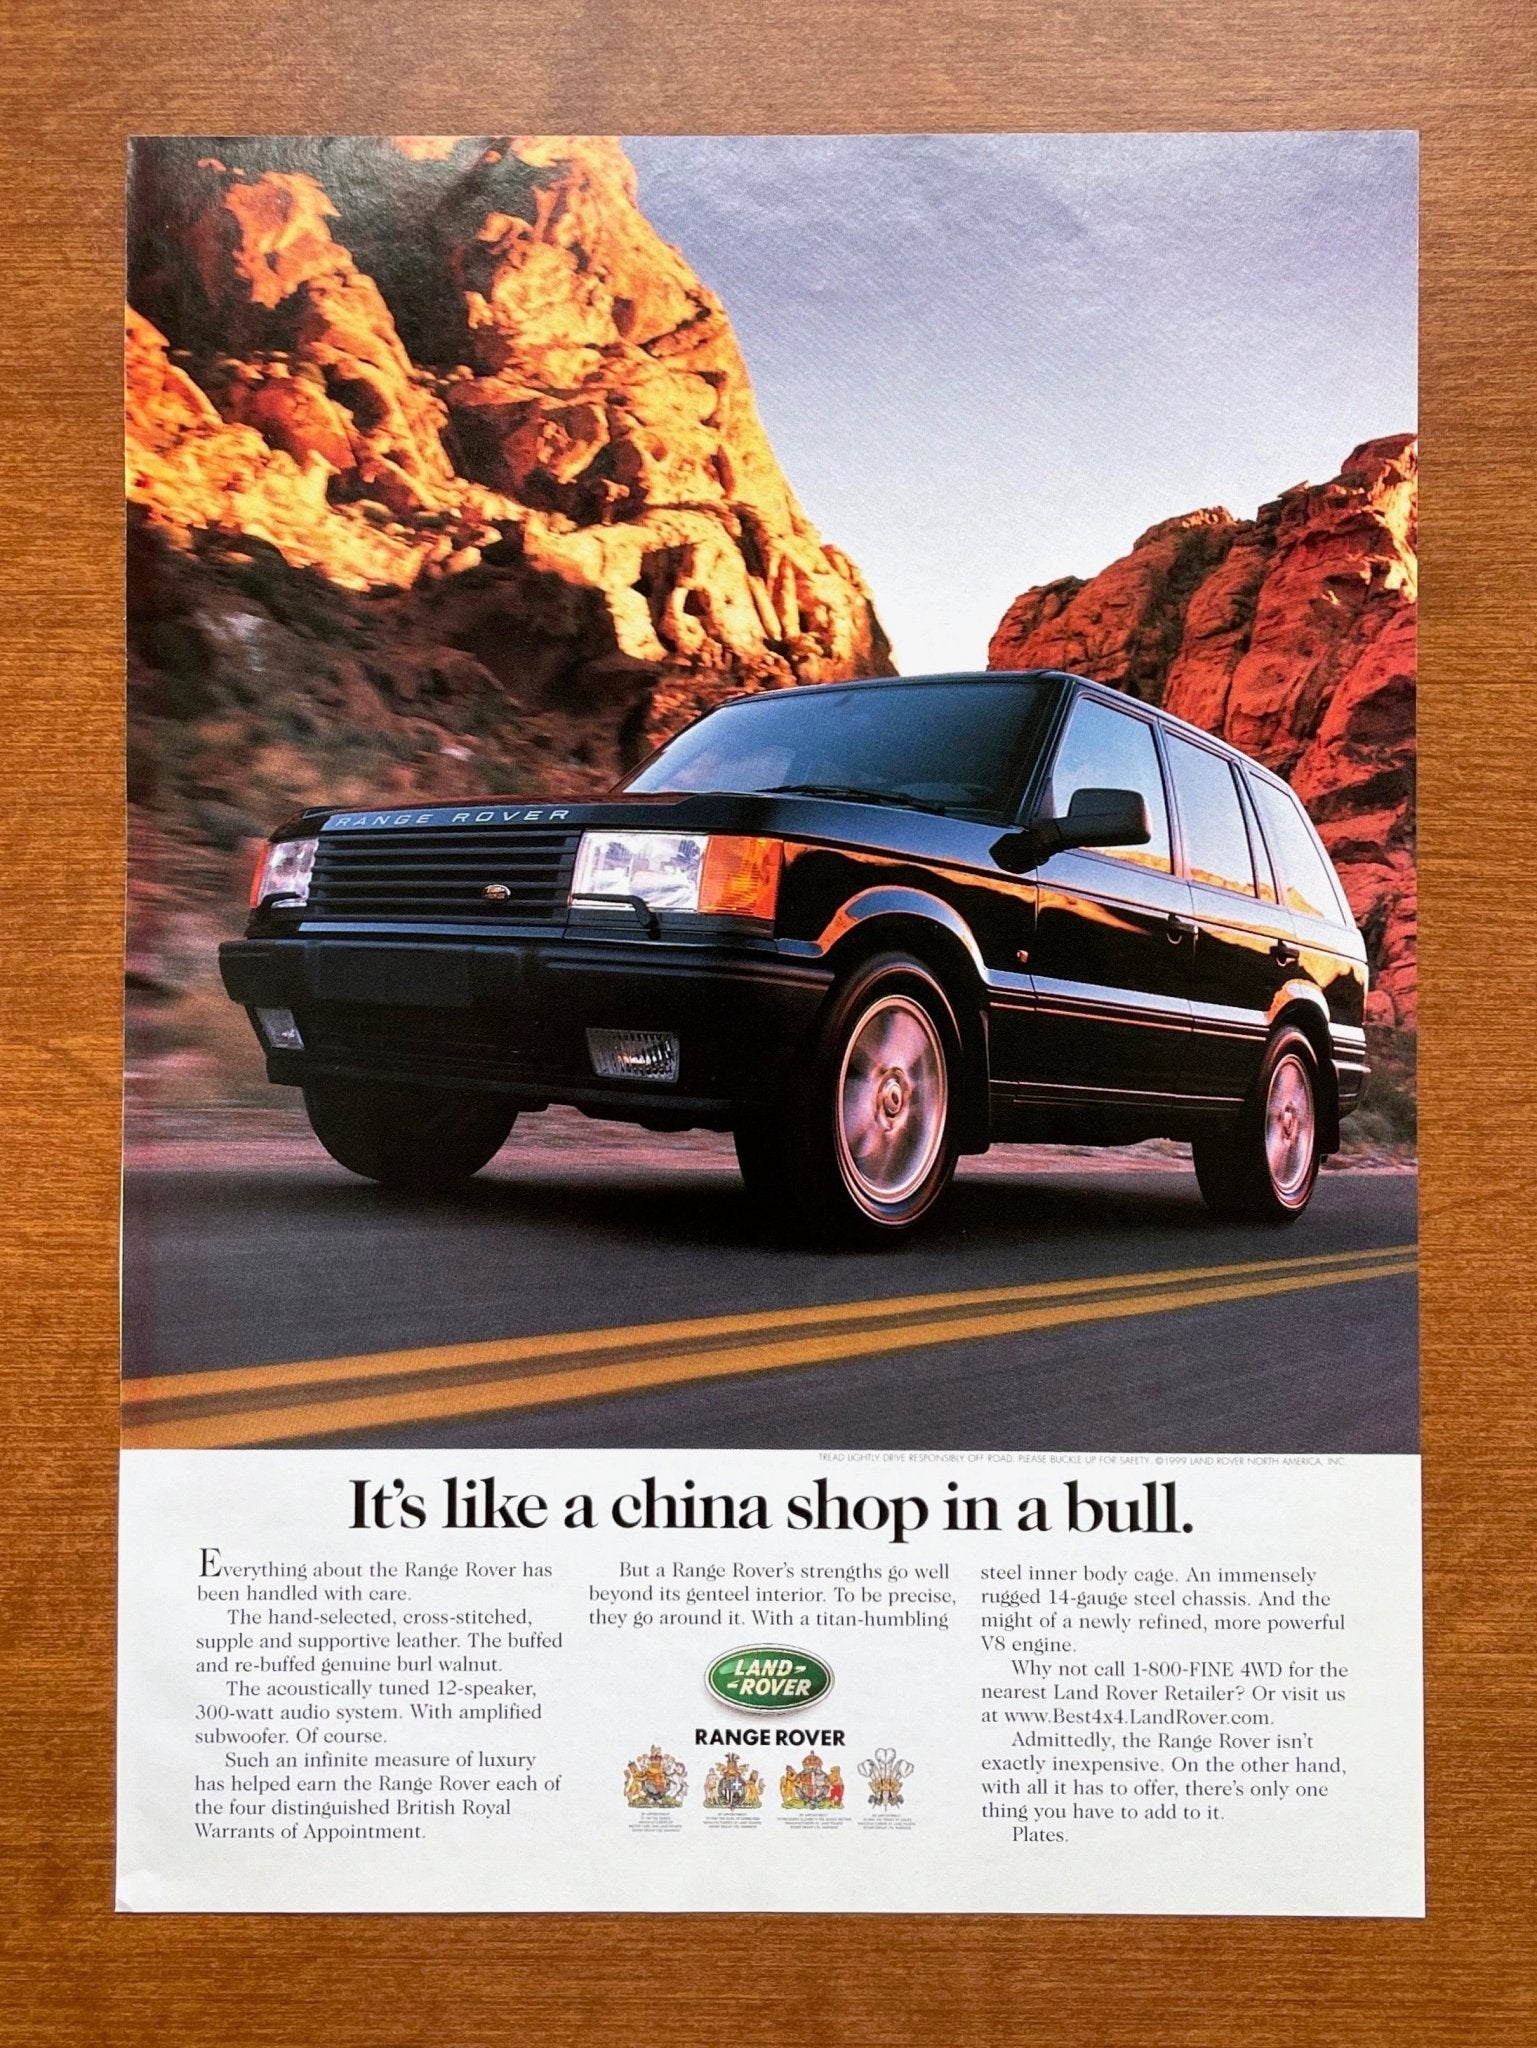 1999 Range Rover "china shop in a bull." Advertisement